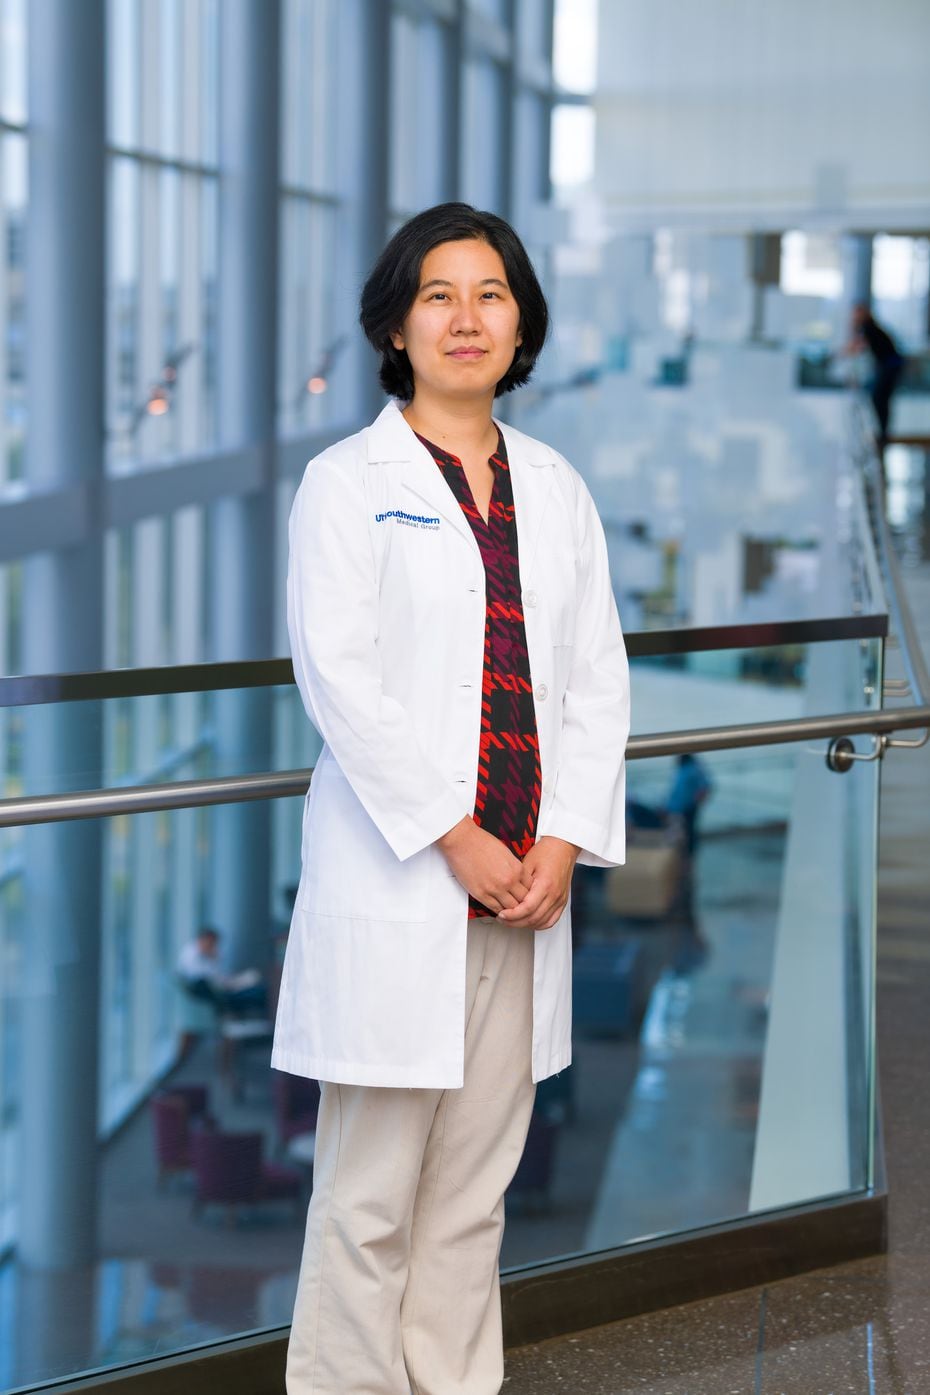 Dr. Angeline Wang says there are excellent treatment options for many patients with...